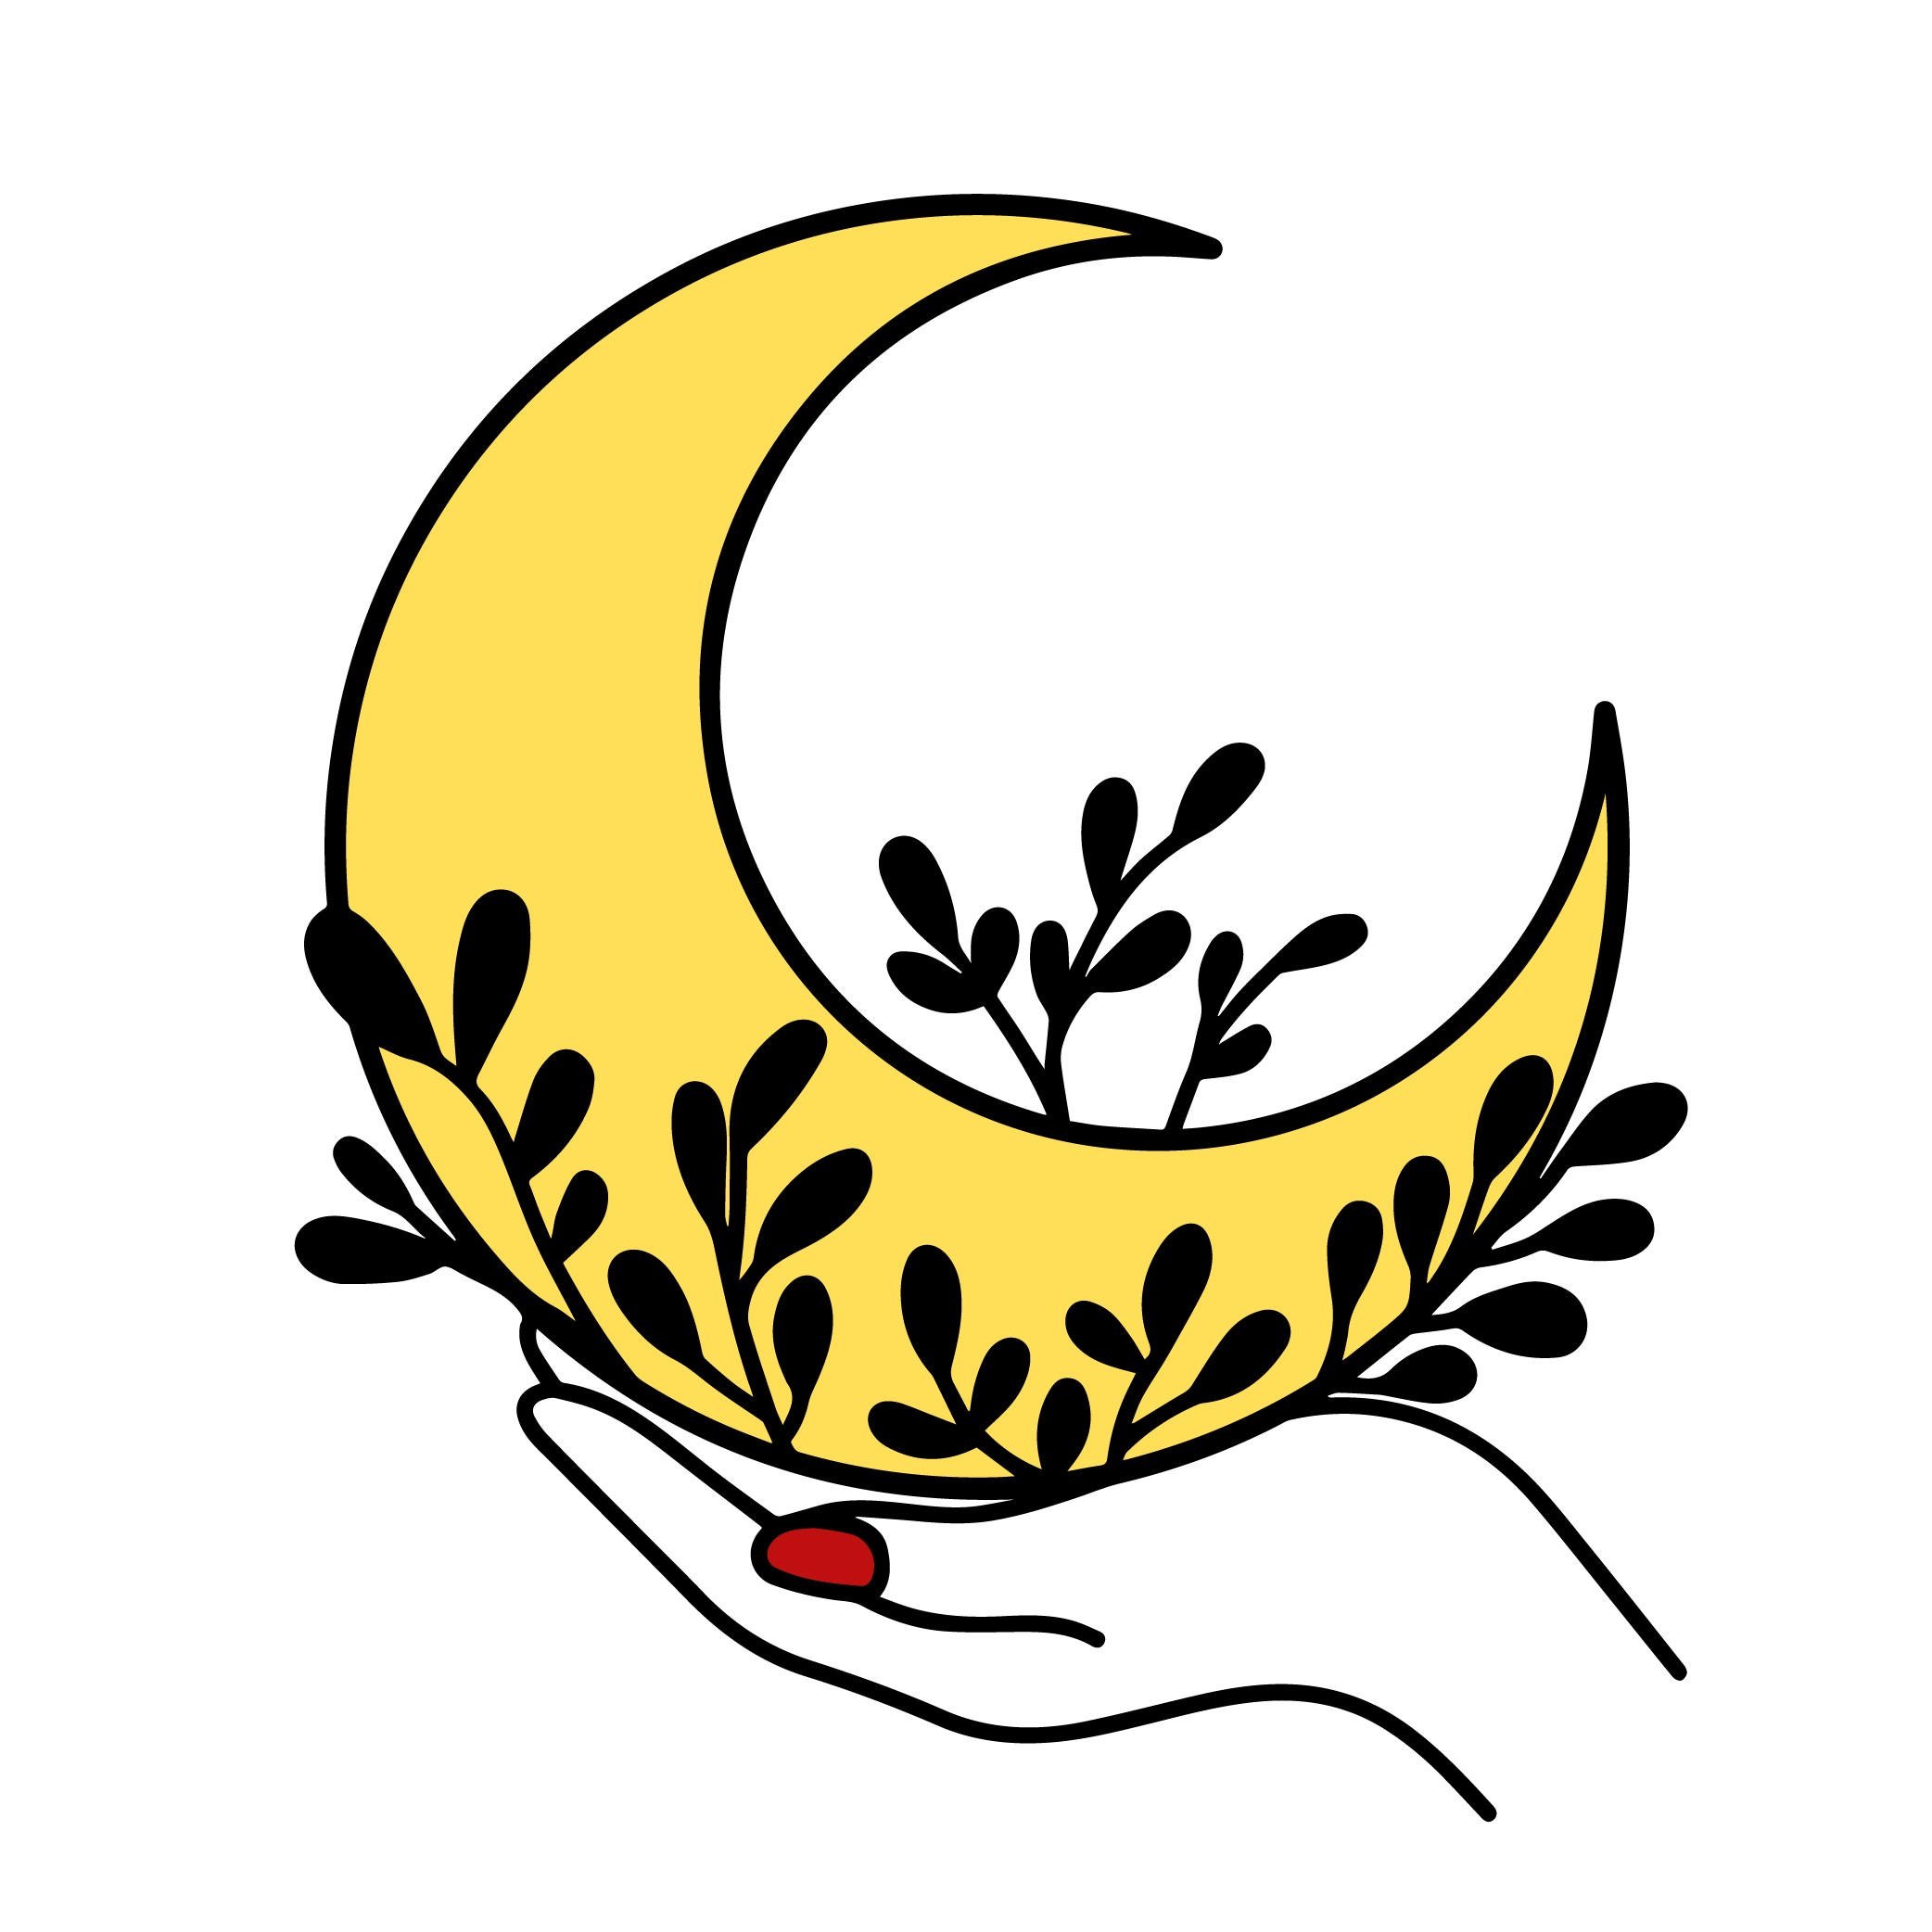 Moon In Hand - Design ( SVG - PNG - JPG - EPS ) Included cover image.